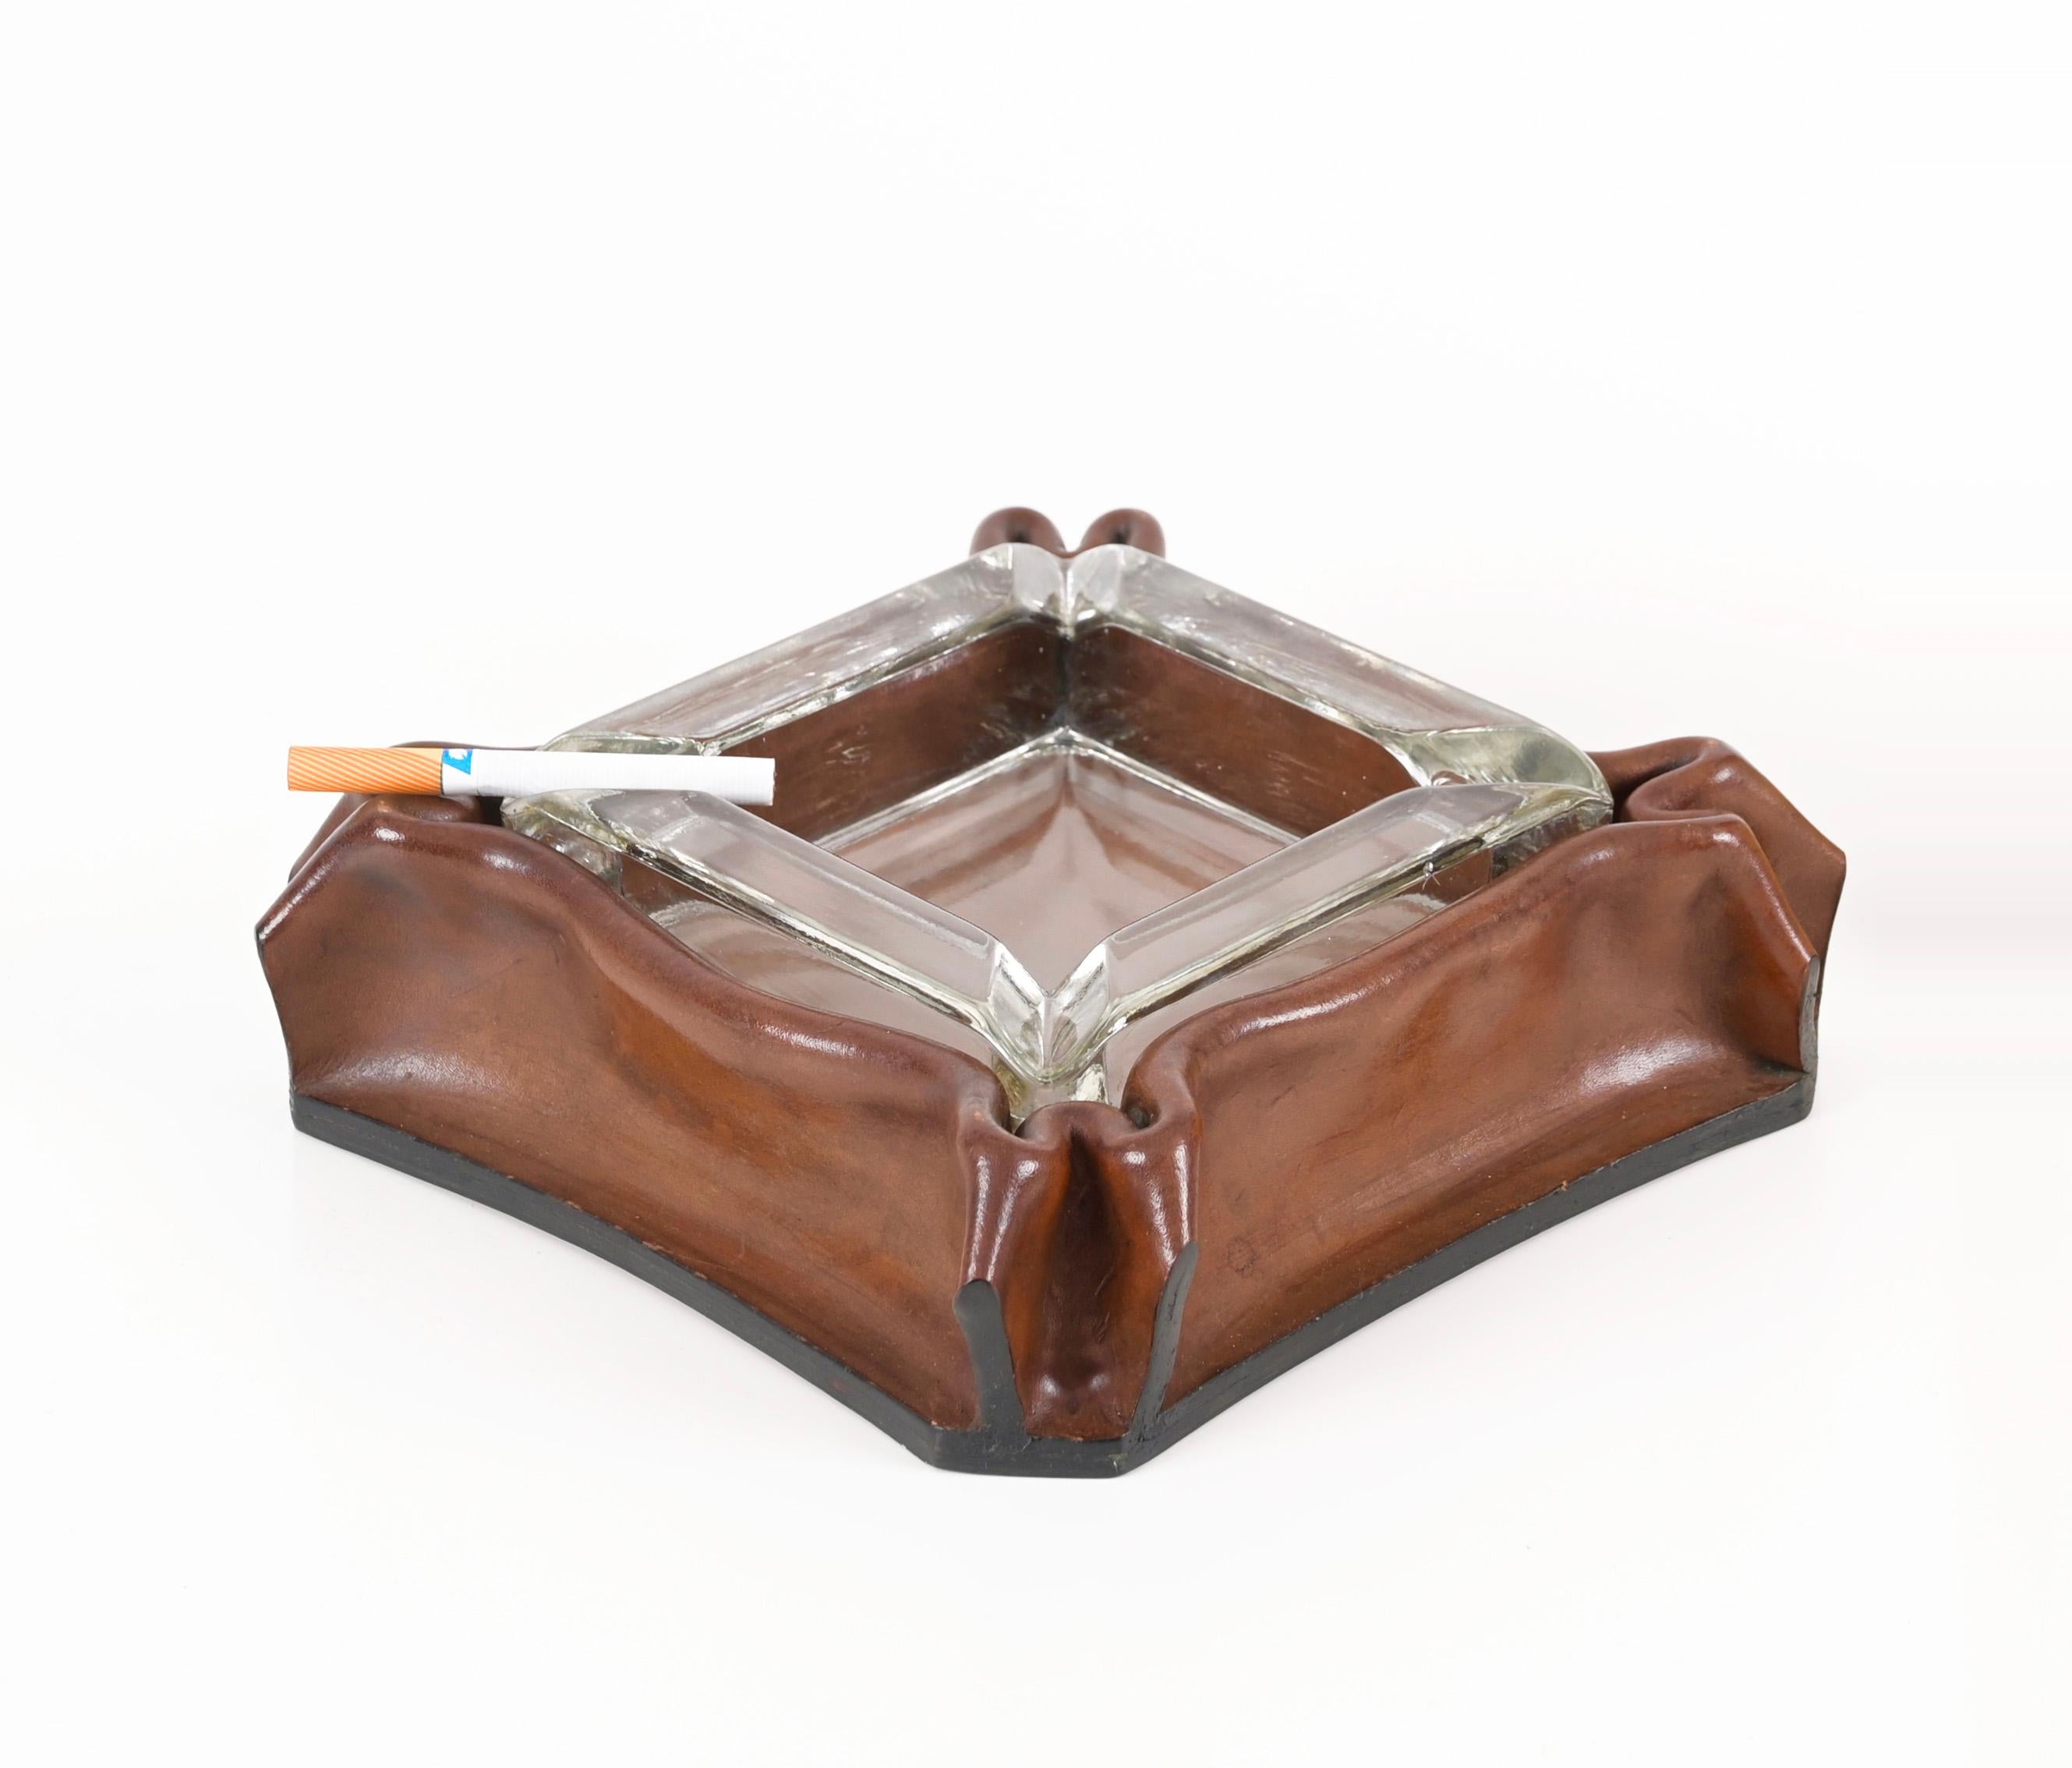 Stunning ashtray with pleated leather frame and crystal glass. This charming ashtray was designed by Jacques Adnet and produced in Italy during the 1970s, it is signed on the bottom. 

This elegant ashtray has an external frame fully made in a